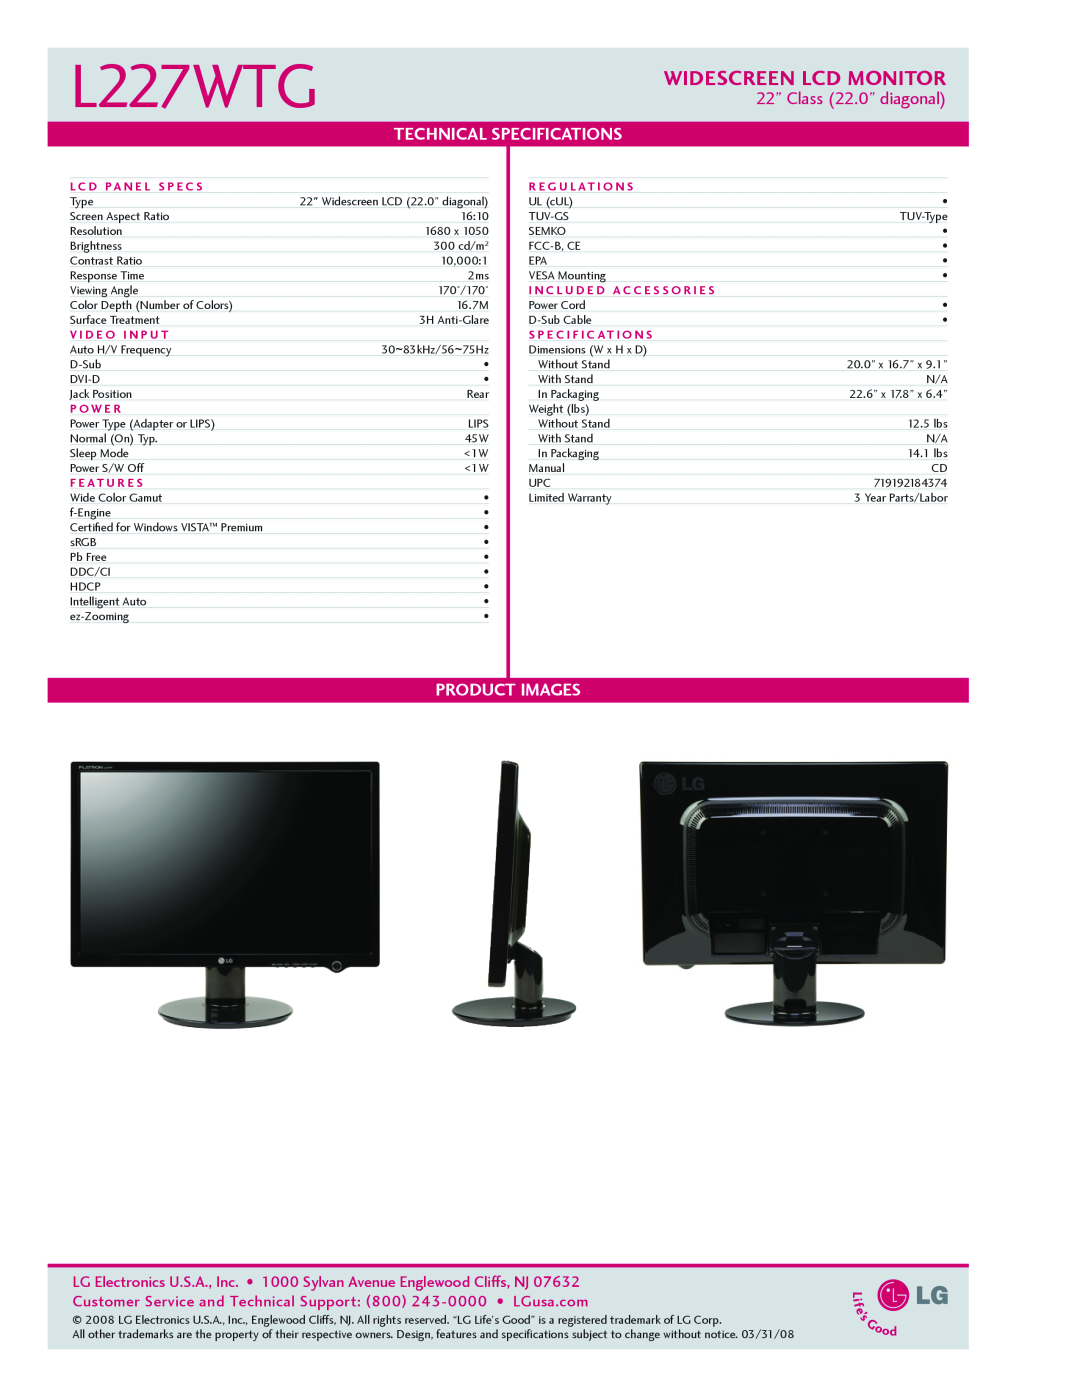 LG Electronics L227WTG manual Widescreen LCD Monitor, 22” Class 22.0” diagonal, Technical specifications, Product Images 